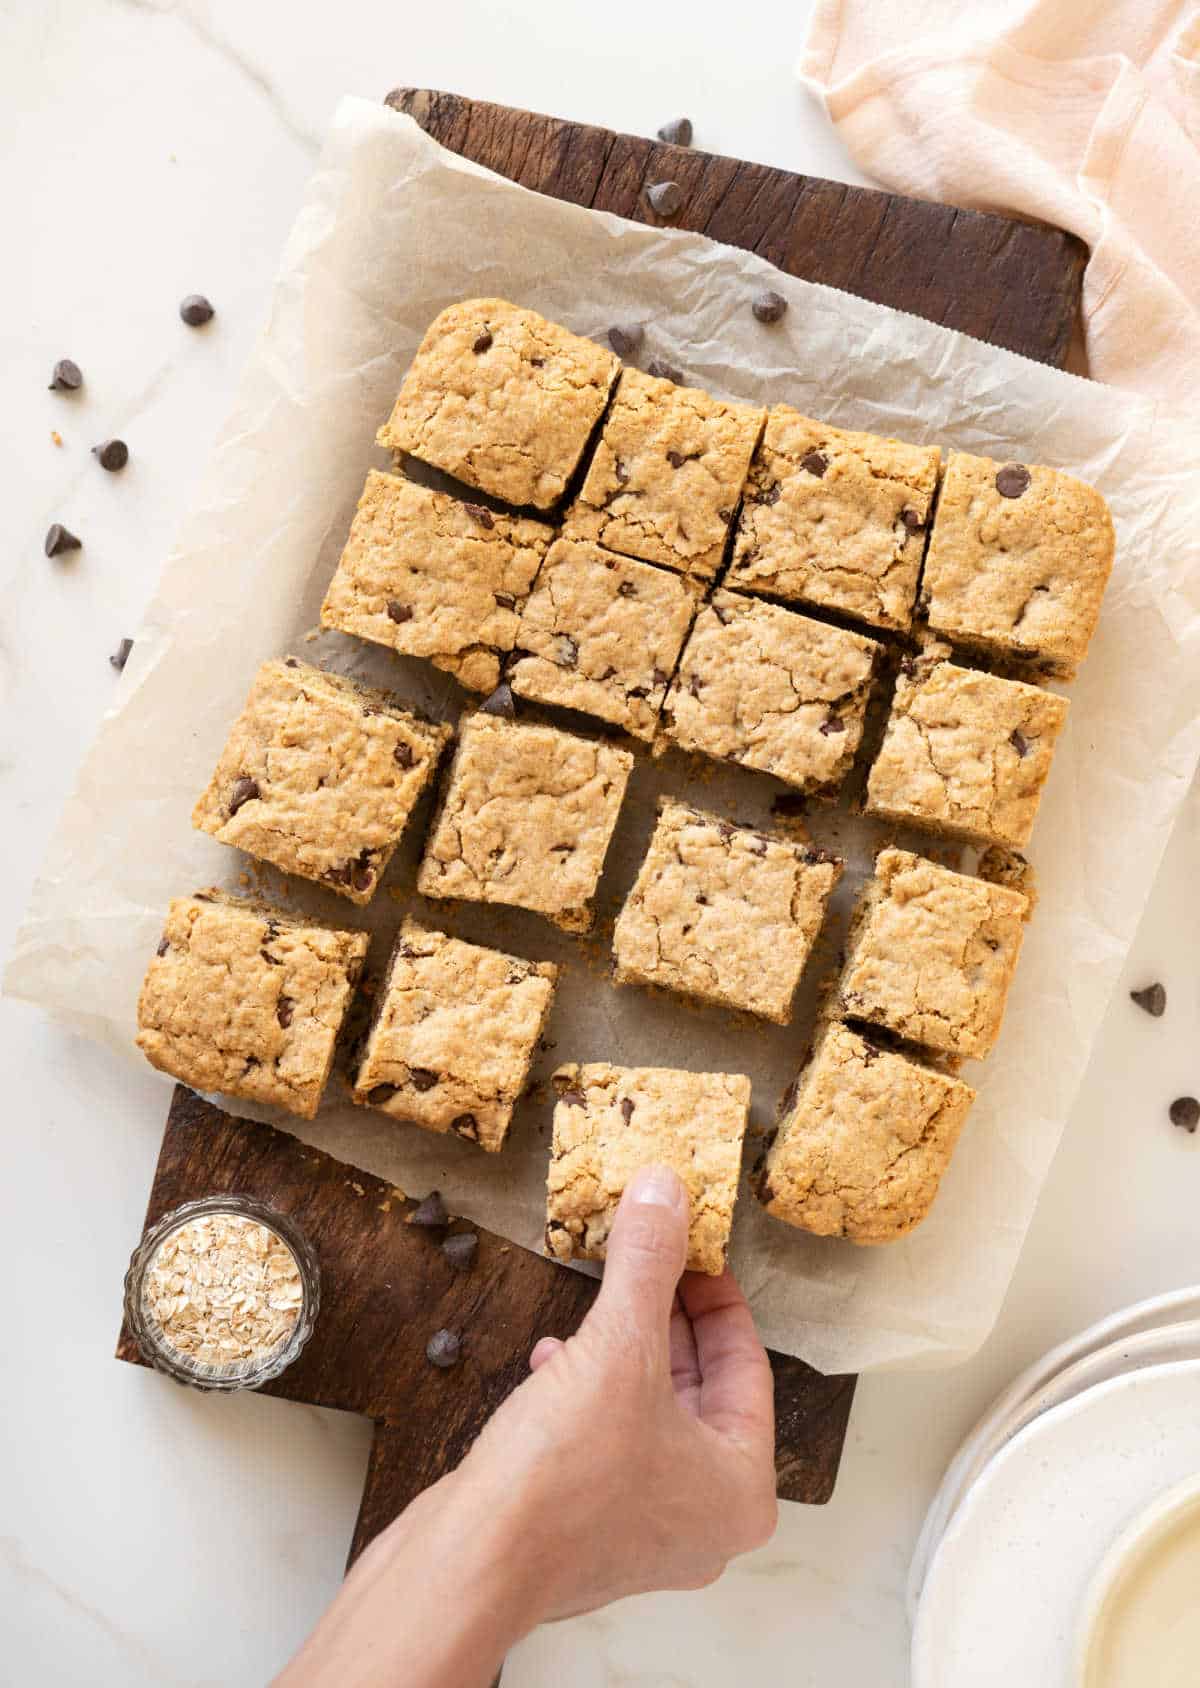 Overview of chocolate chip oatmeal bars on a beige parchment paper and dark wooden board. Light colored surface. Hand grabbing one bar.